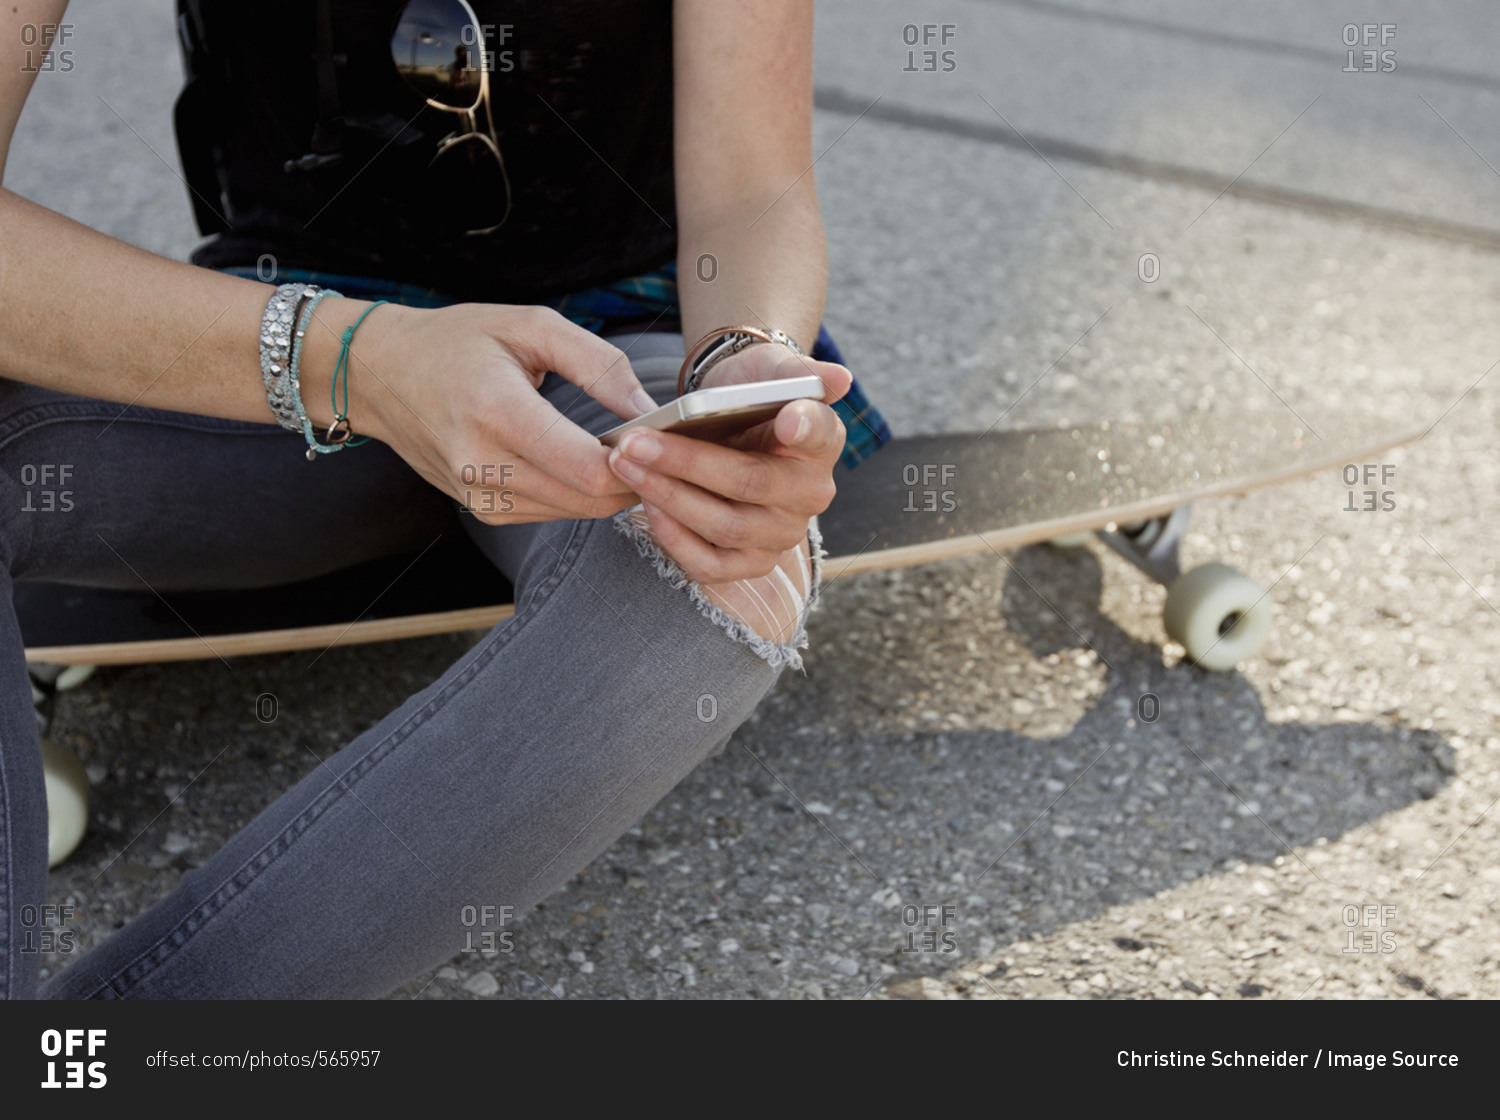 Mid section of female skateboarder sitting on skateboard texting on smartphone